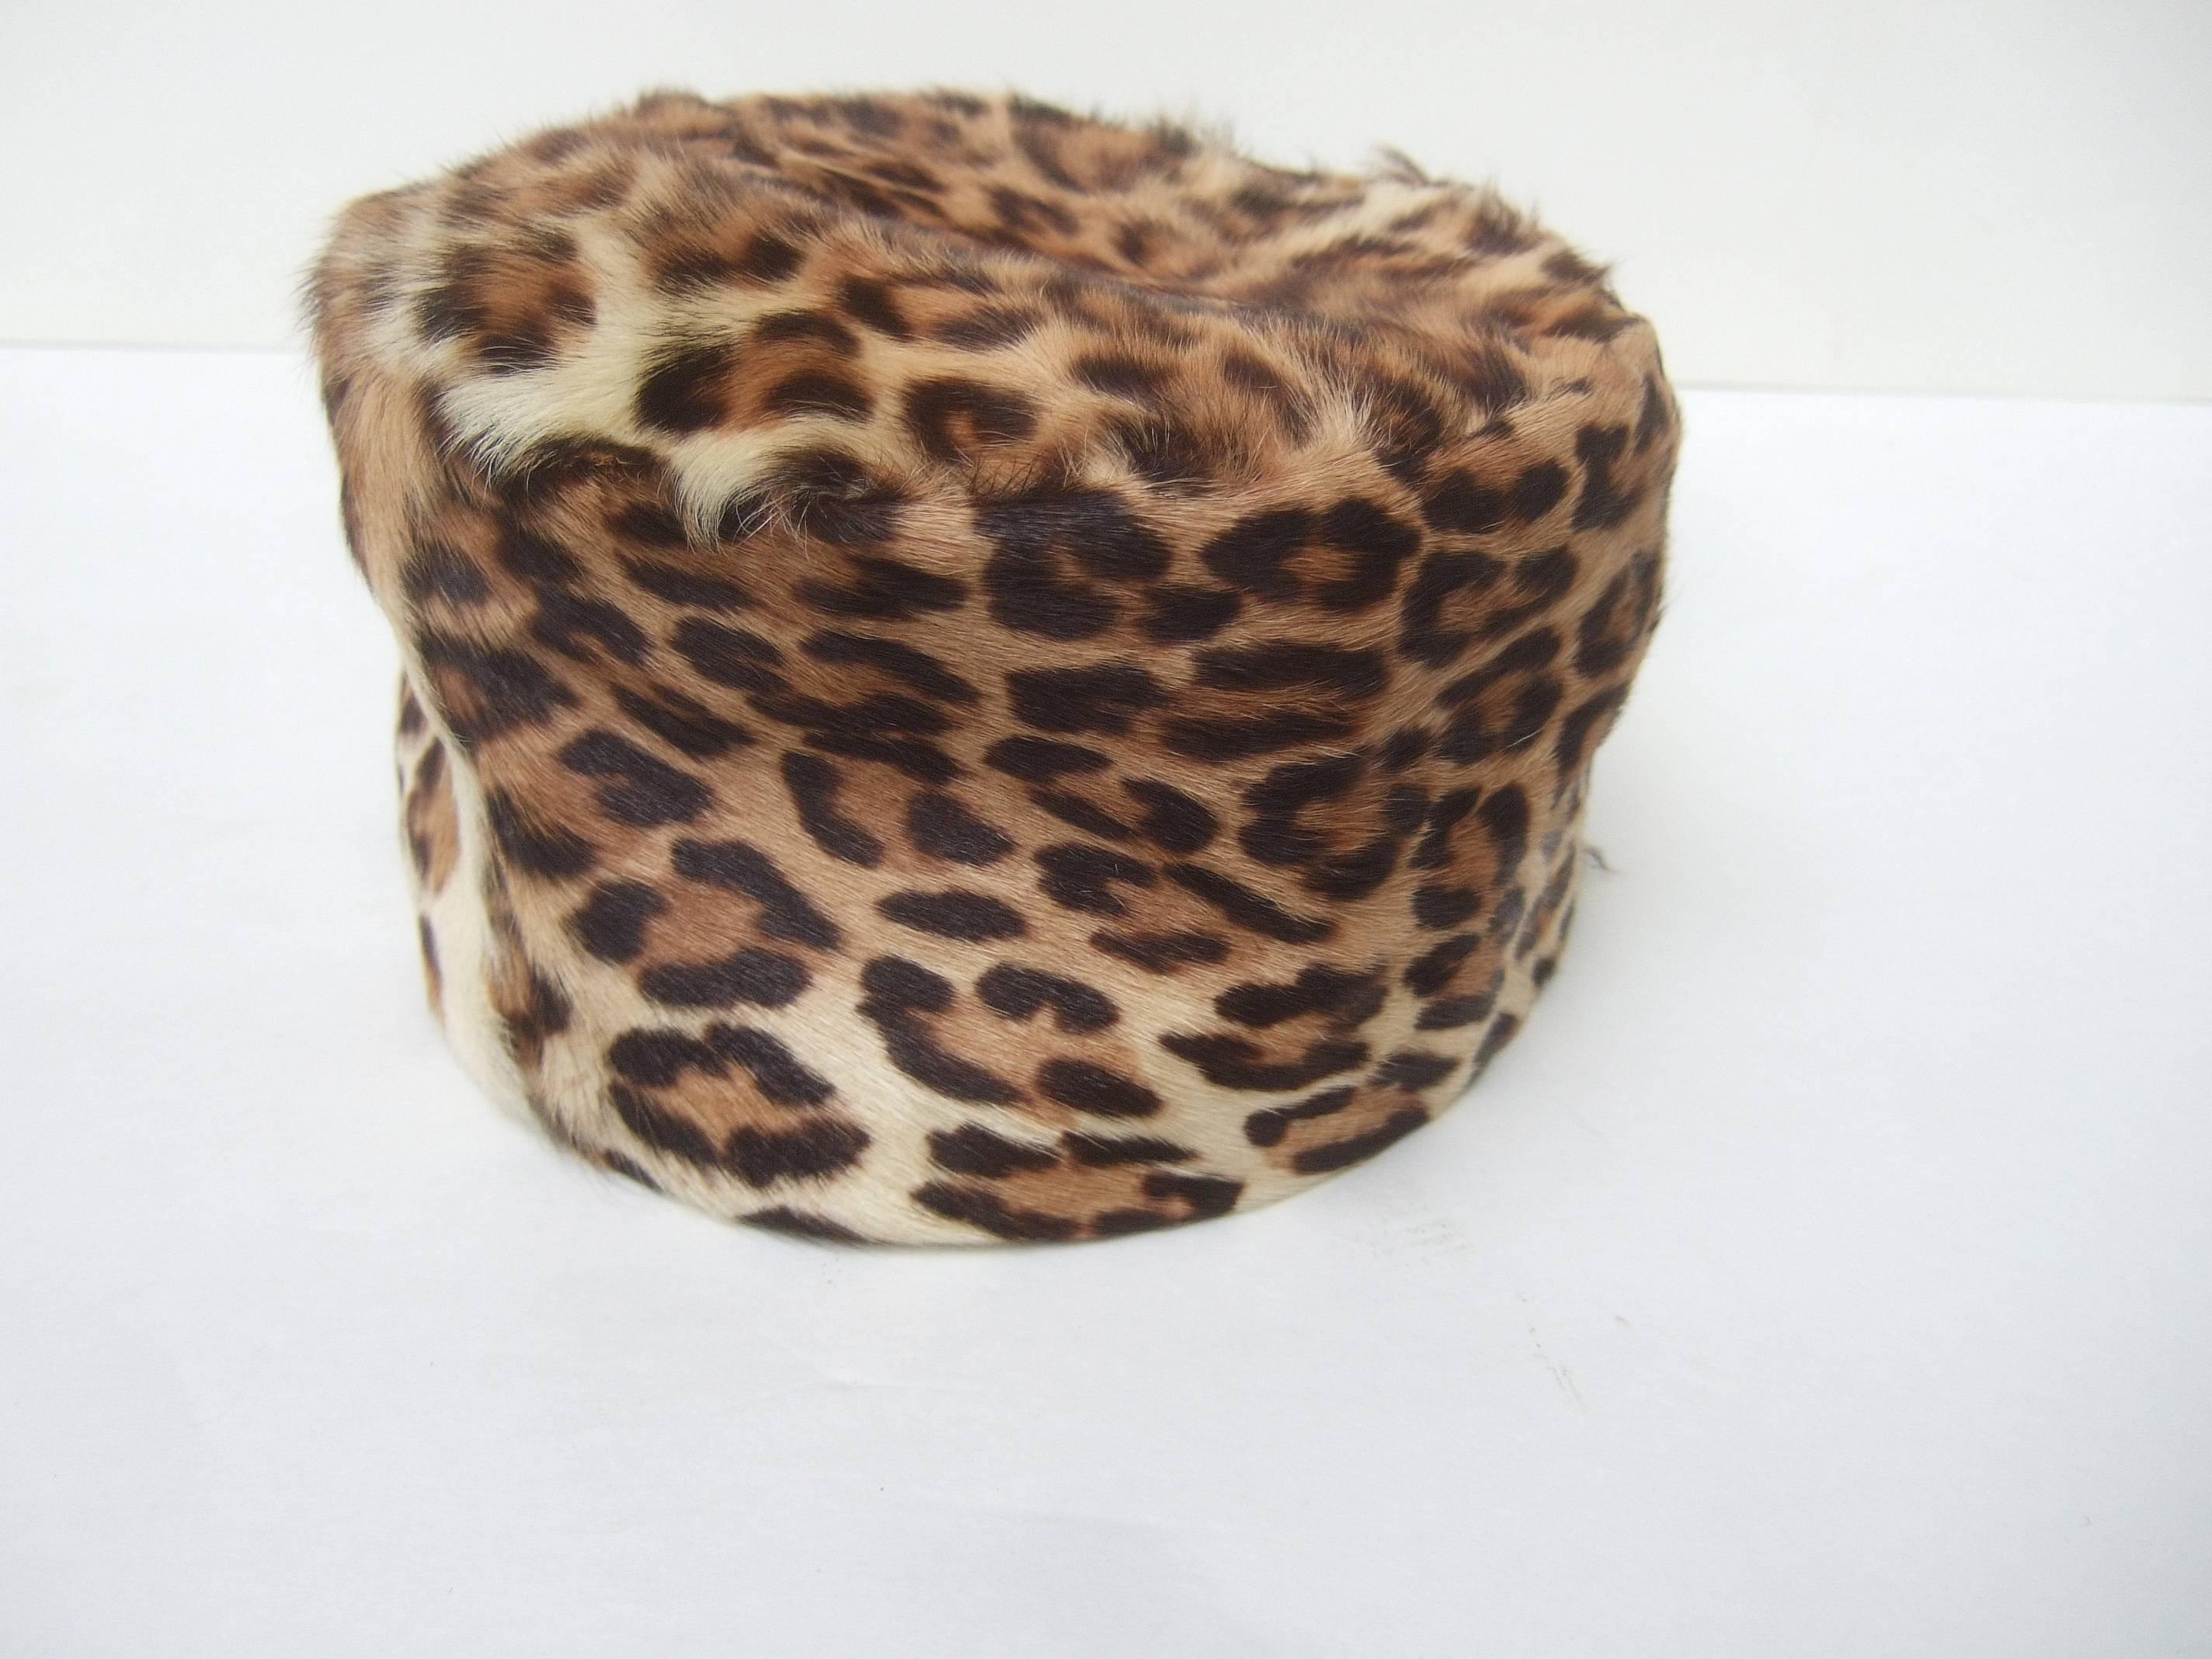 Exotic animal print pony hair pill box hat 
The chic retro animal print hat is always
in vogue 

A must for the hat collector

The interior is lined in black taffeta 
Designed by Betmar 

Measurements 
The hat size circumference